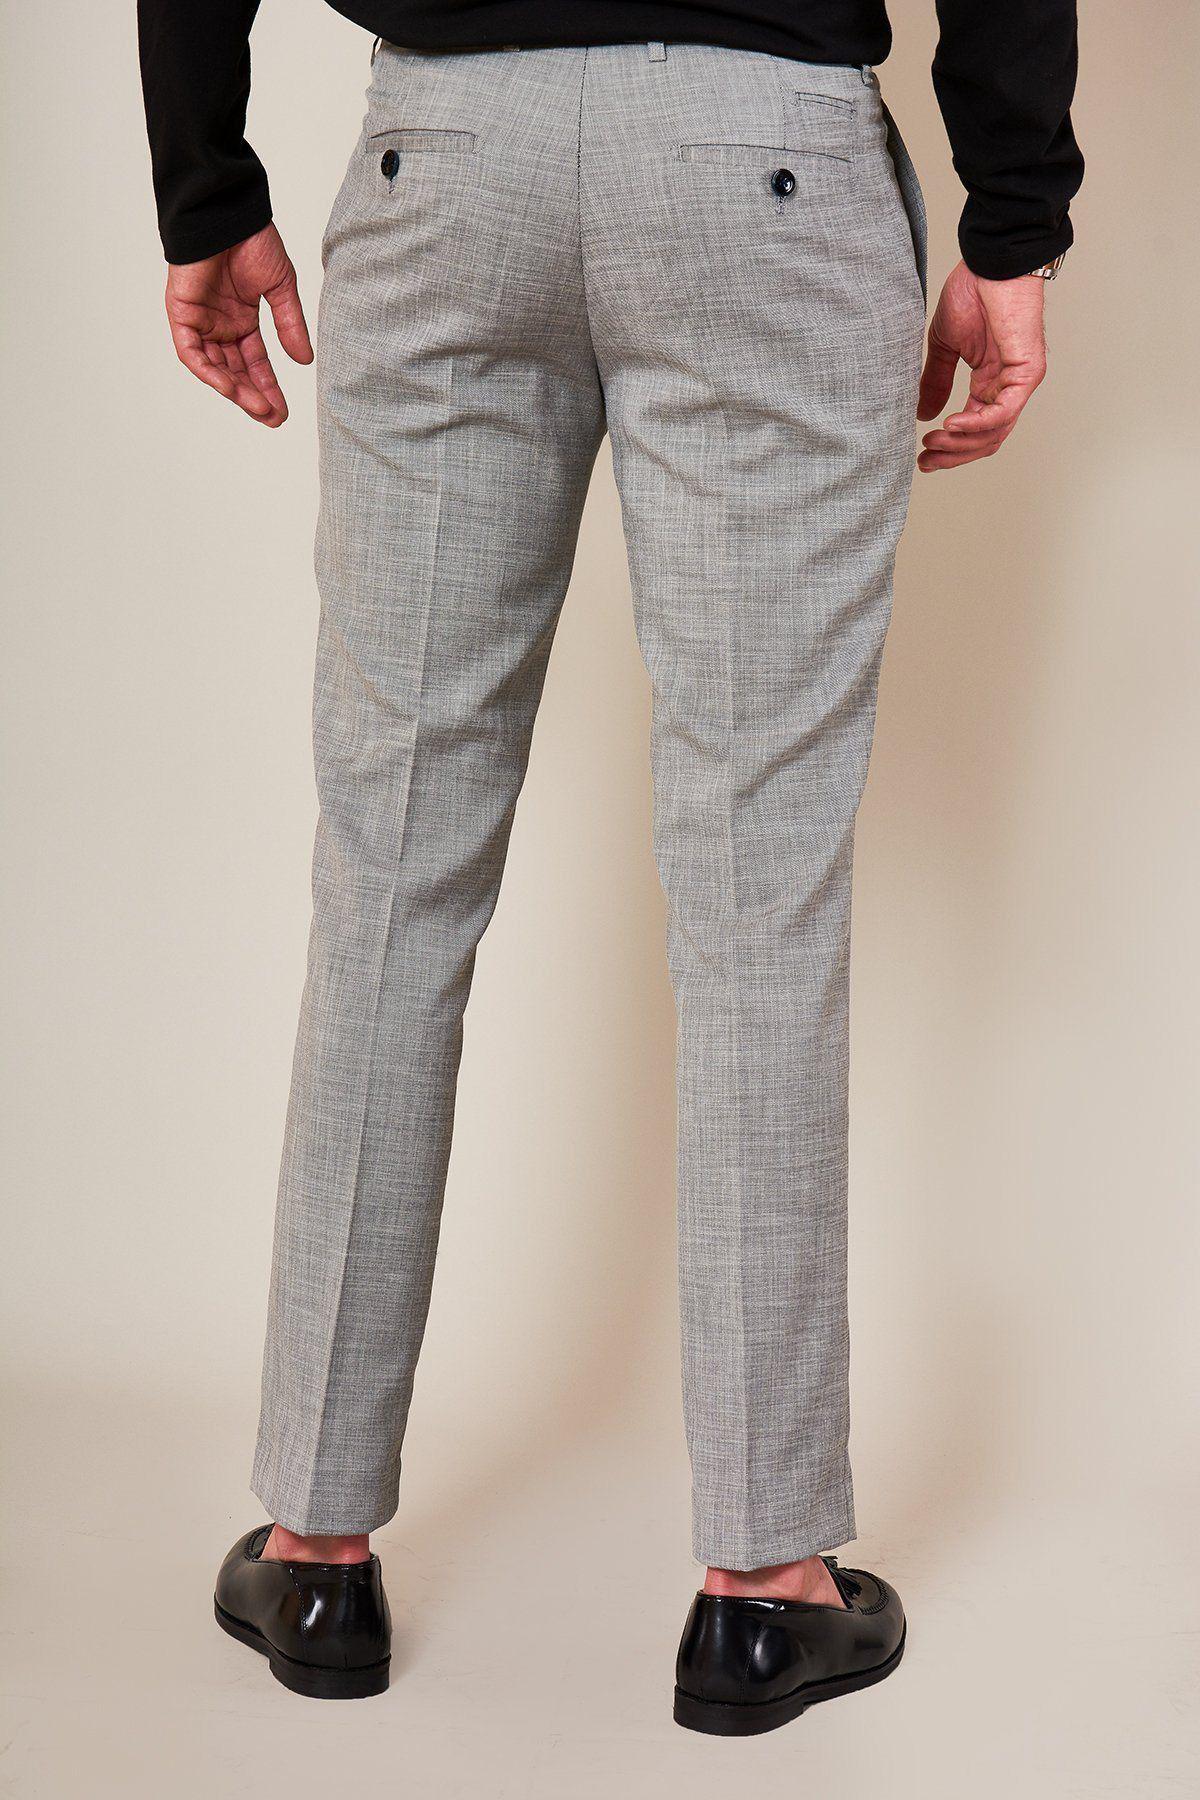 Men's Silver Gray Pants Concitor Mens Grey Trousers